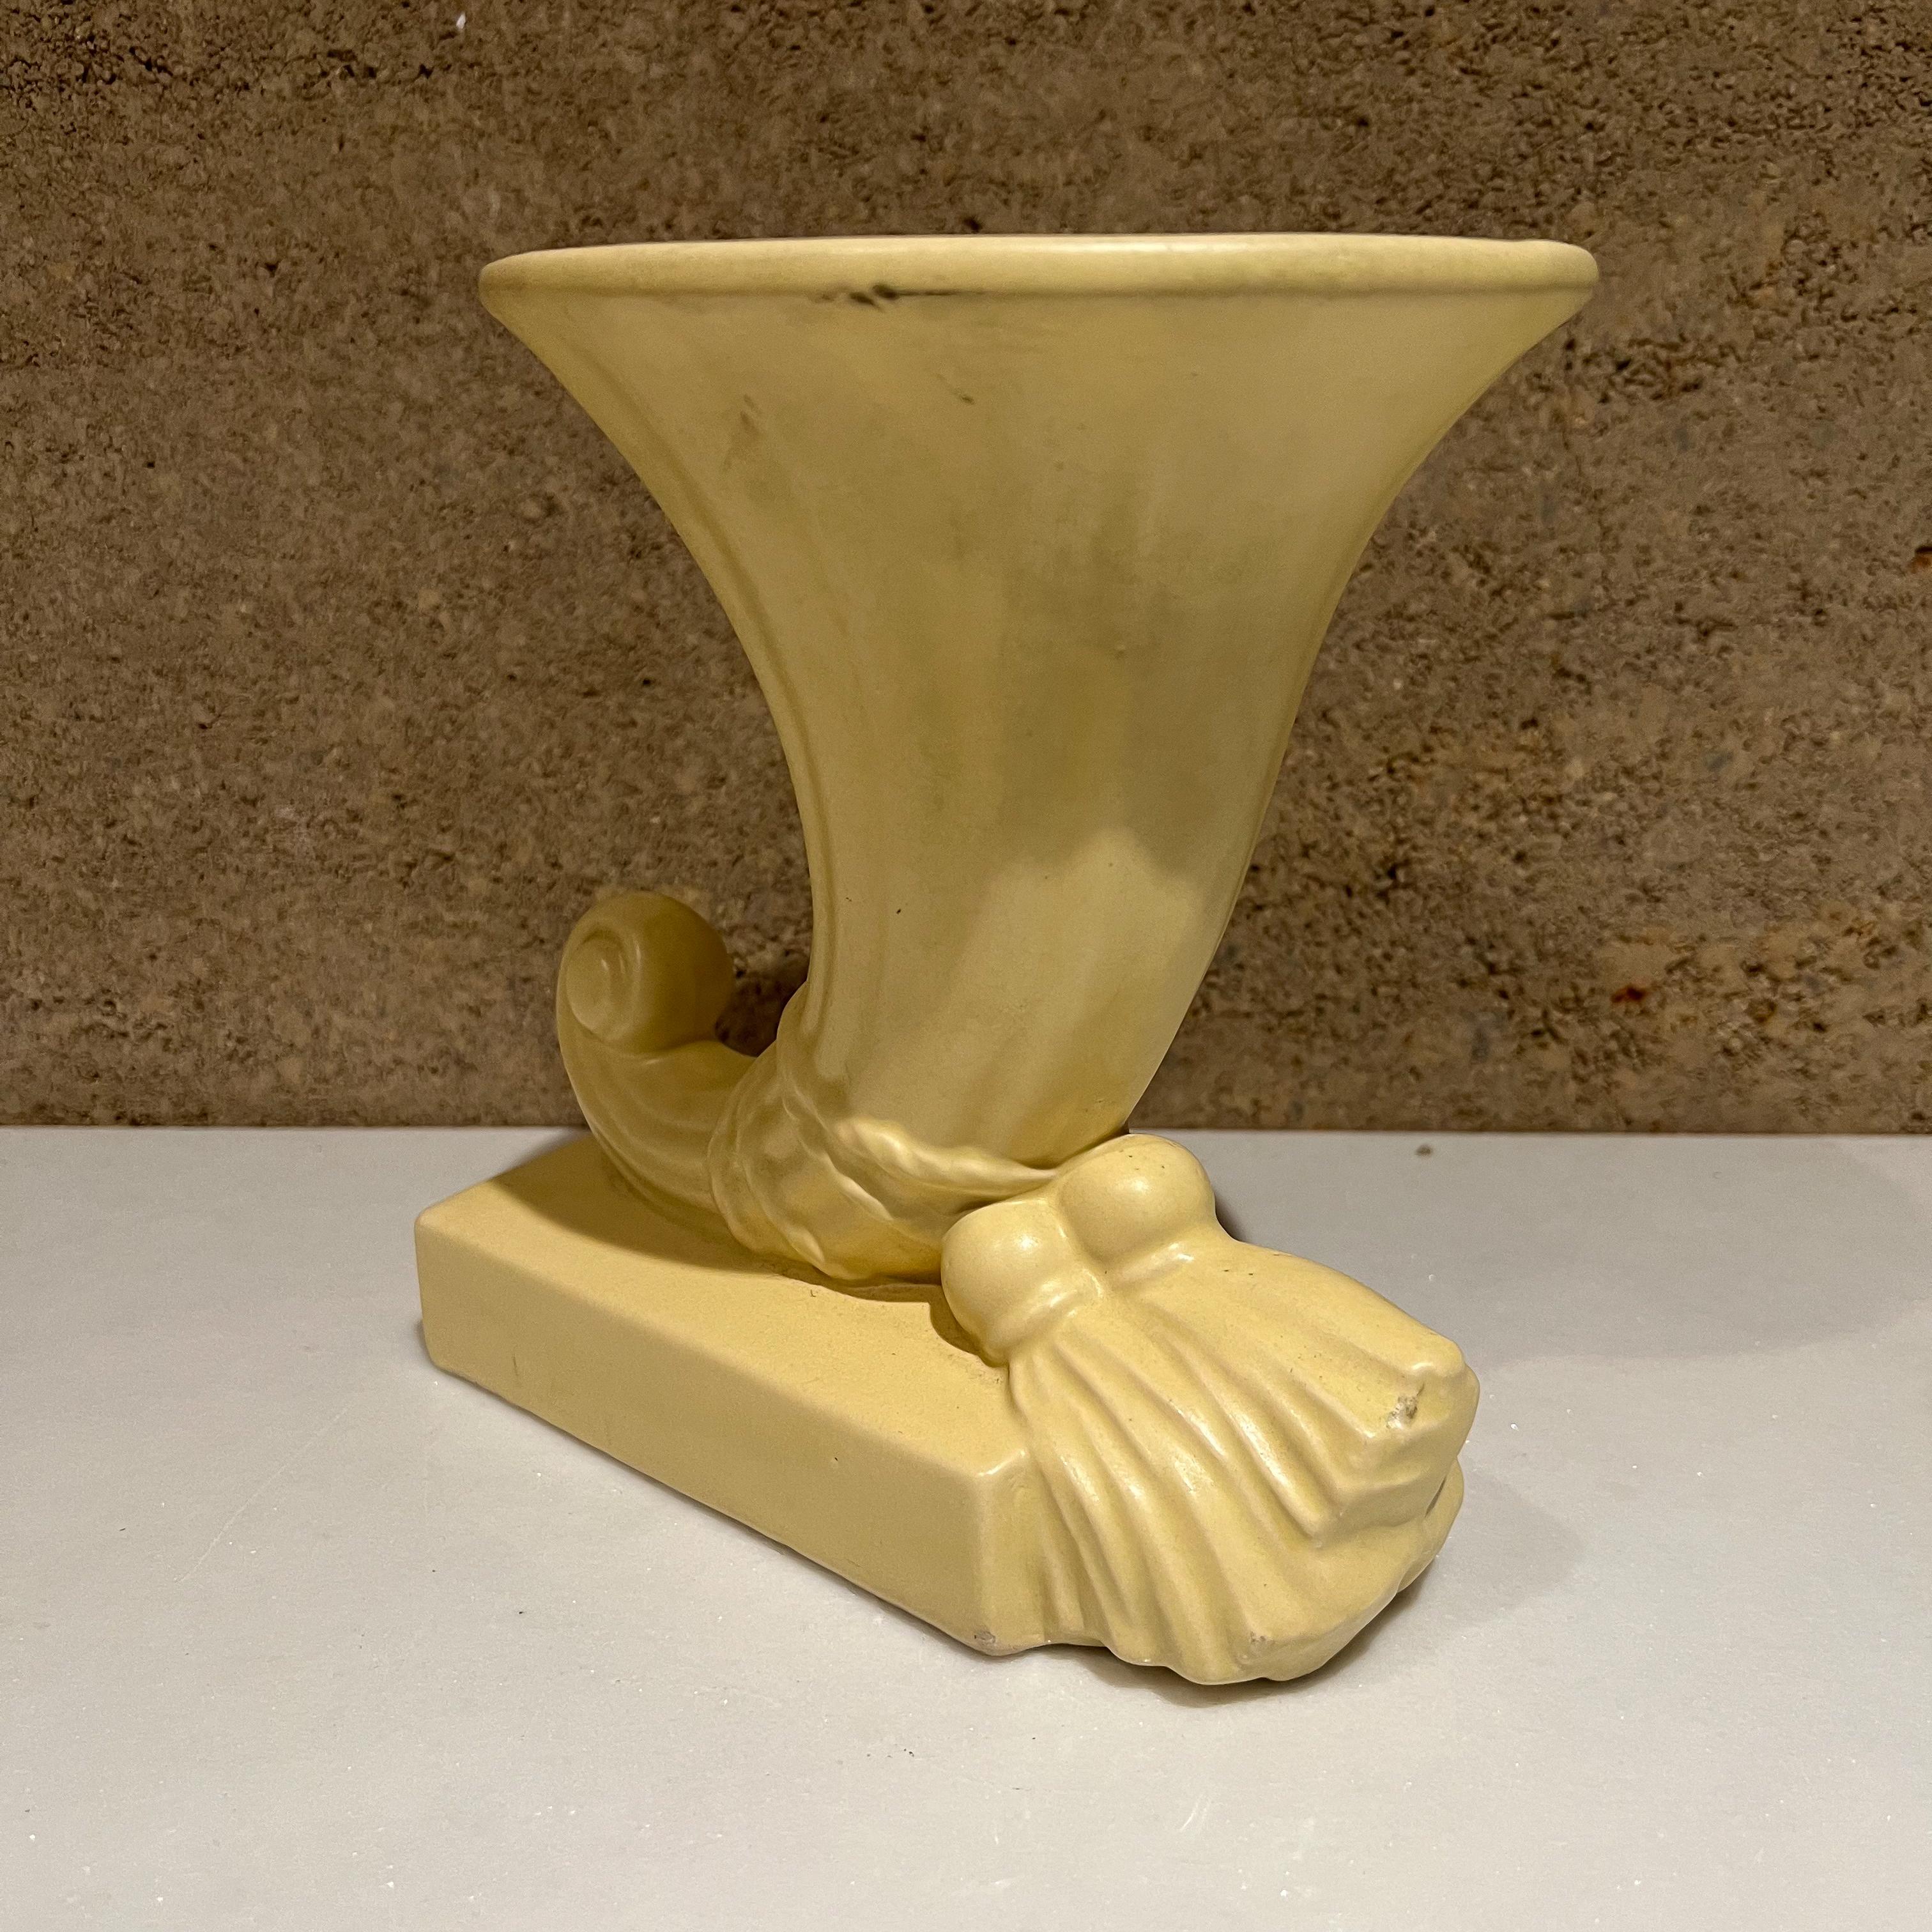 1950s Creamy tasseled trumpet horn of plenty vintage ceramic art.
Very elegant Mid-Century Modern Art Deco decorative piece.
Measures: 7.5 tall x 8 wide x 5.5 deep.
Preowned unrestored vintage condition.
See images provided please.

